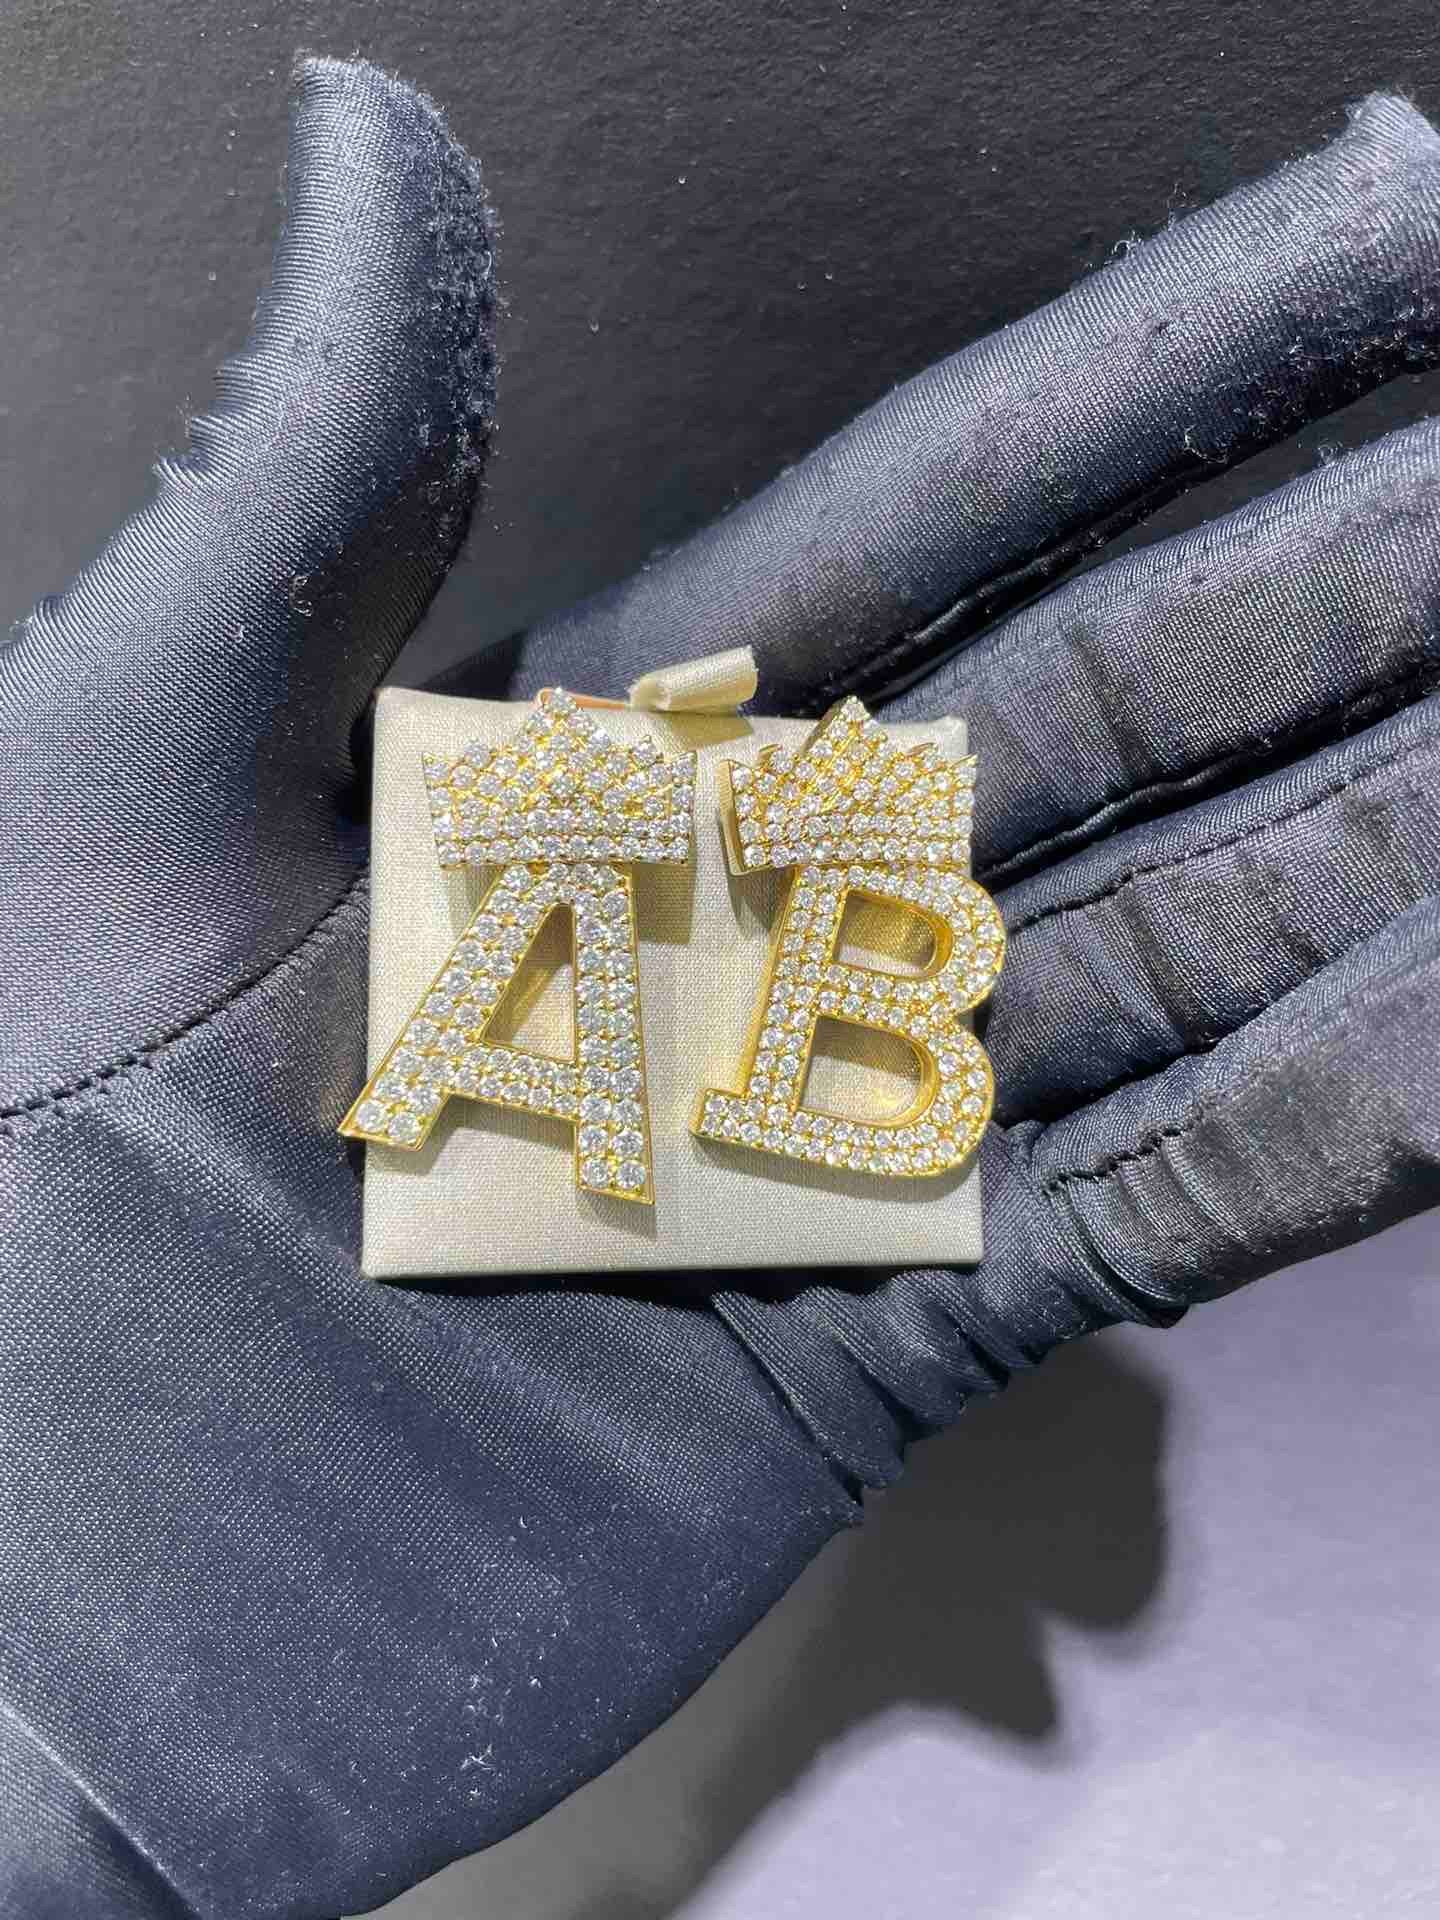 14k "Iced Out Pendant" VS1 Diamond Bust Down Initial Charm 14 grams and 2.75 ct (103pcs, F+) of Natural Diamonds available in any letter in the alphabet